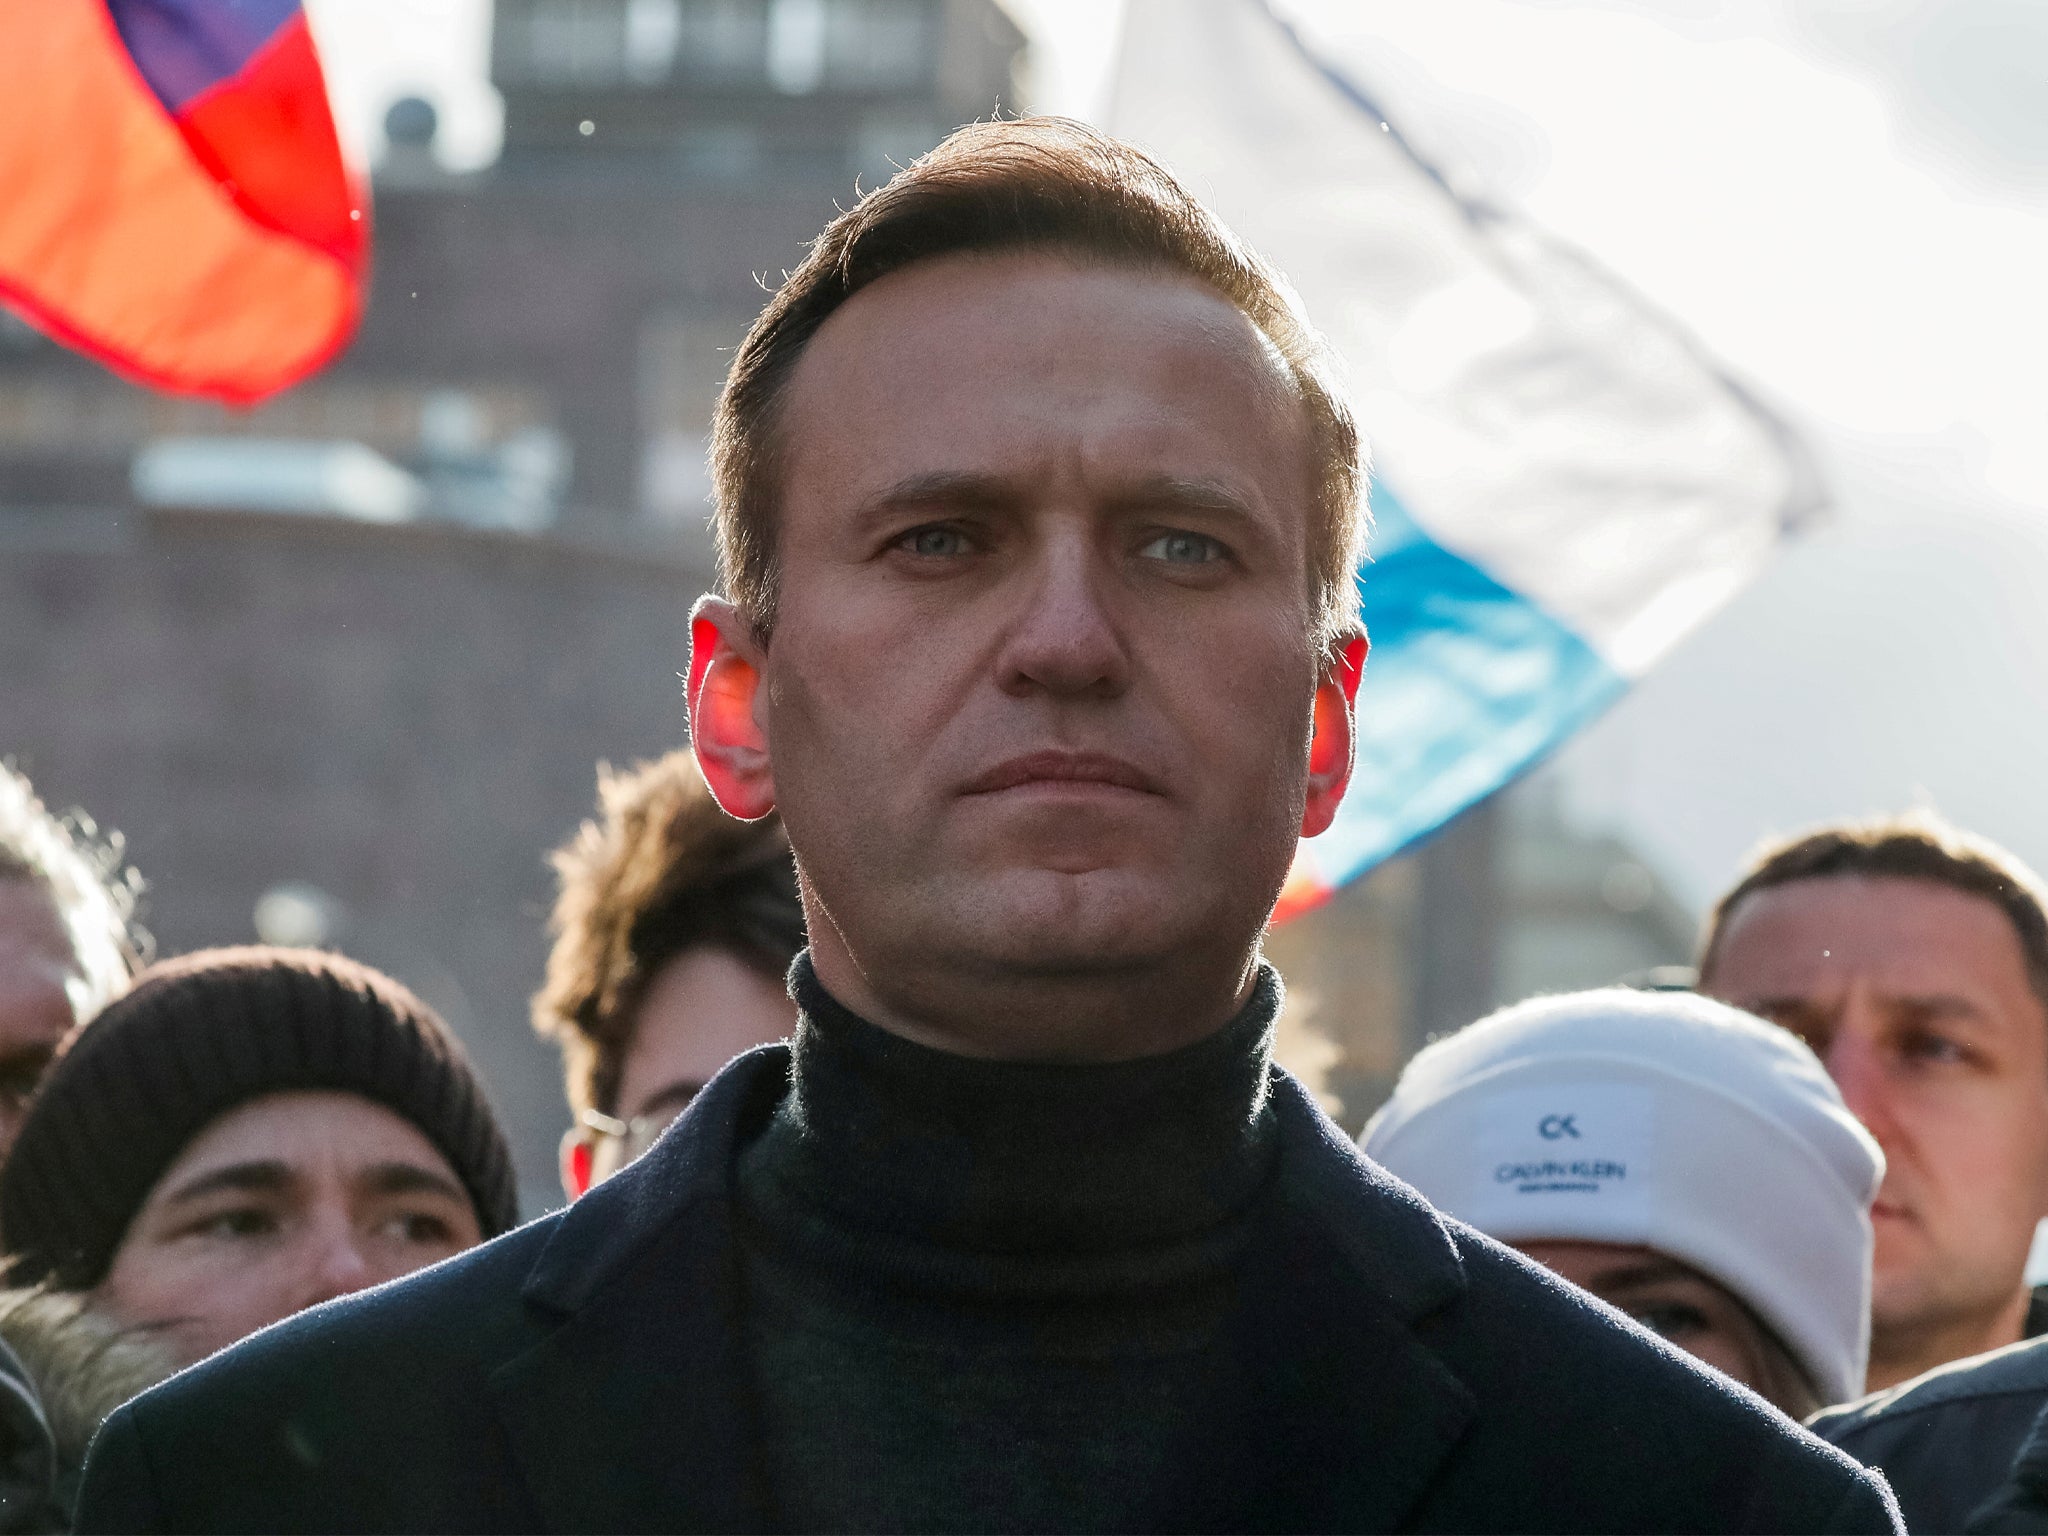 Alexei Navalny takes part in a rally to protest against proposed amendments to the country's constitution, in Moscow, Russia February 29, 2020